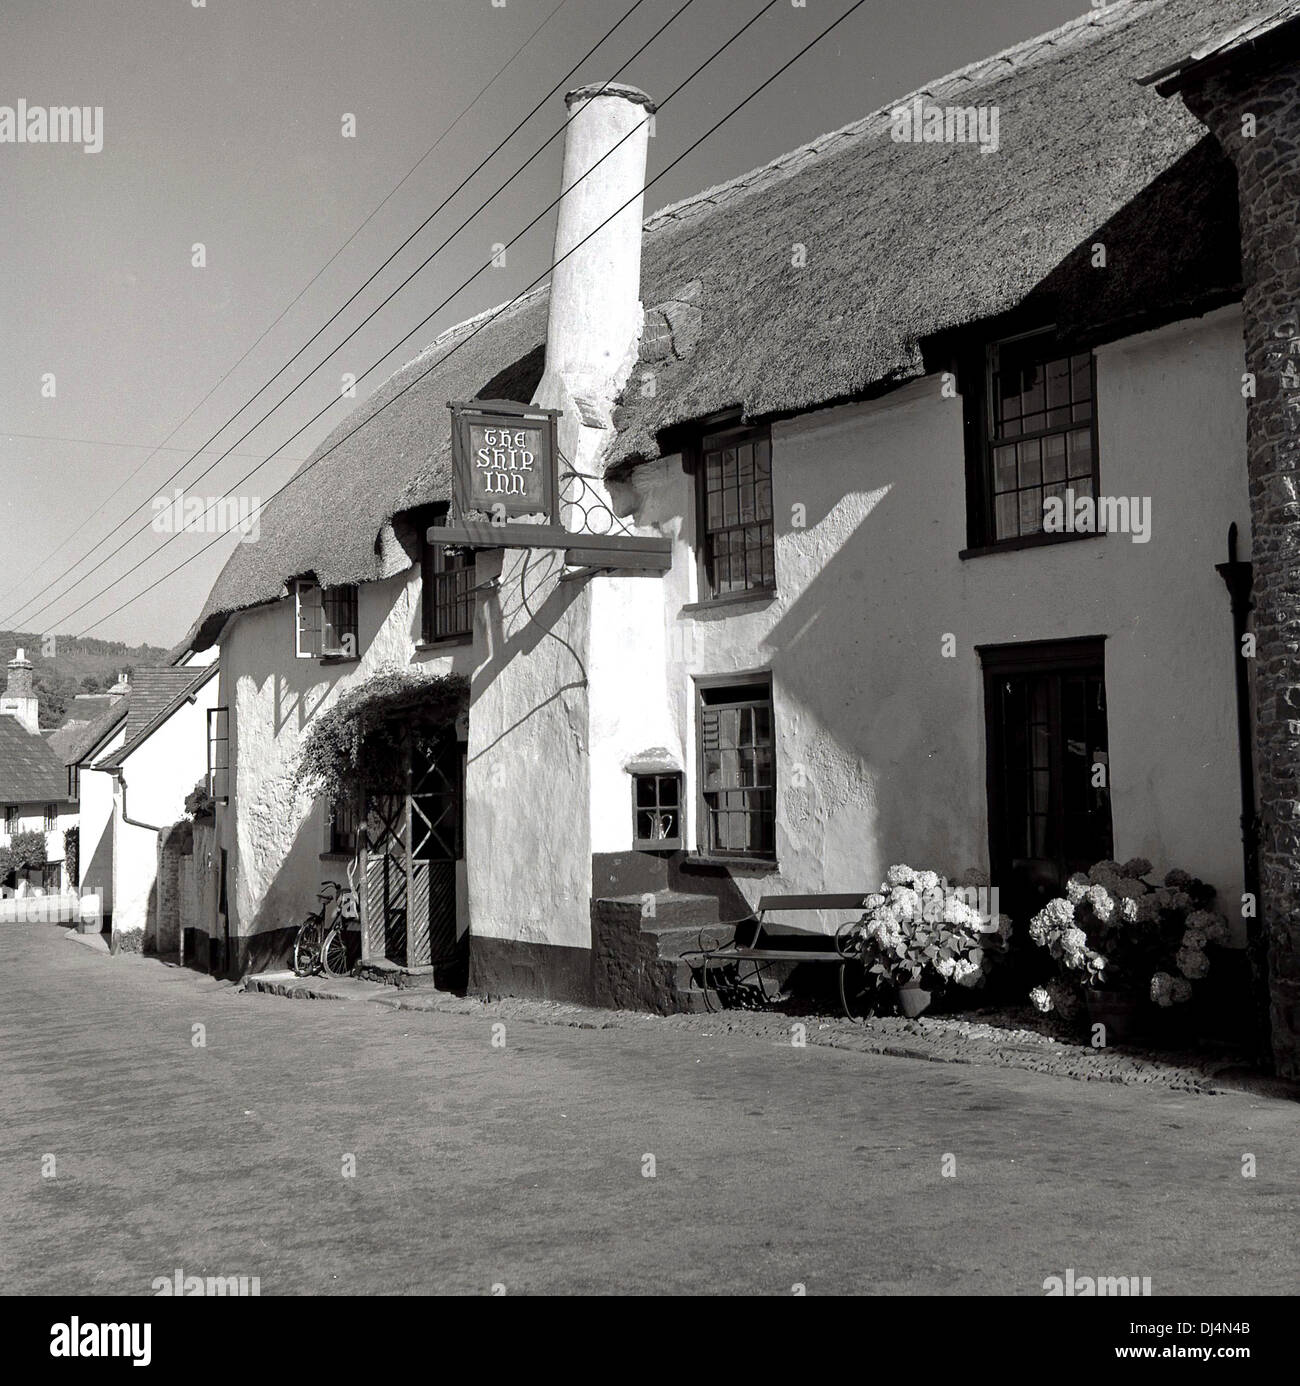 Historical picture from 1950s of The Ship Inn, an old public house or tavern with a thatched roof, located in the high street of the village of Porlock, Somerset, England, UK, set deep into the Exmoor hills. Built in 1290 as a traditional coaching inn with rooms, it is known locally as the Top Ship and is one of the oldest inns on Exmoor. Stock Photo